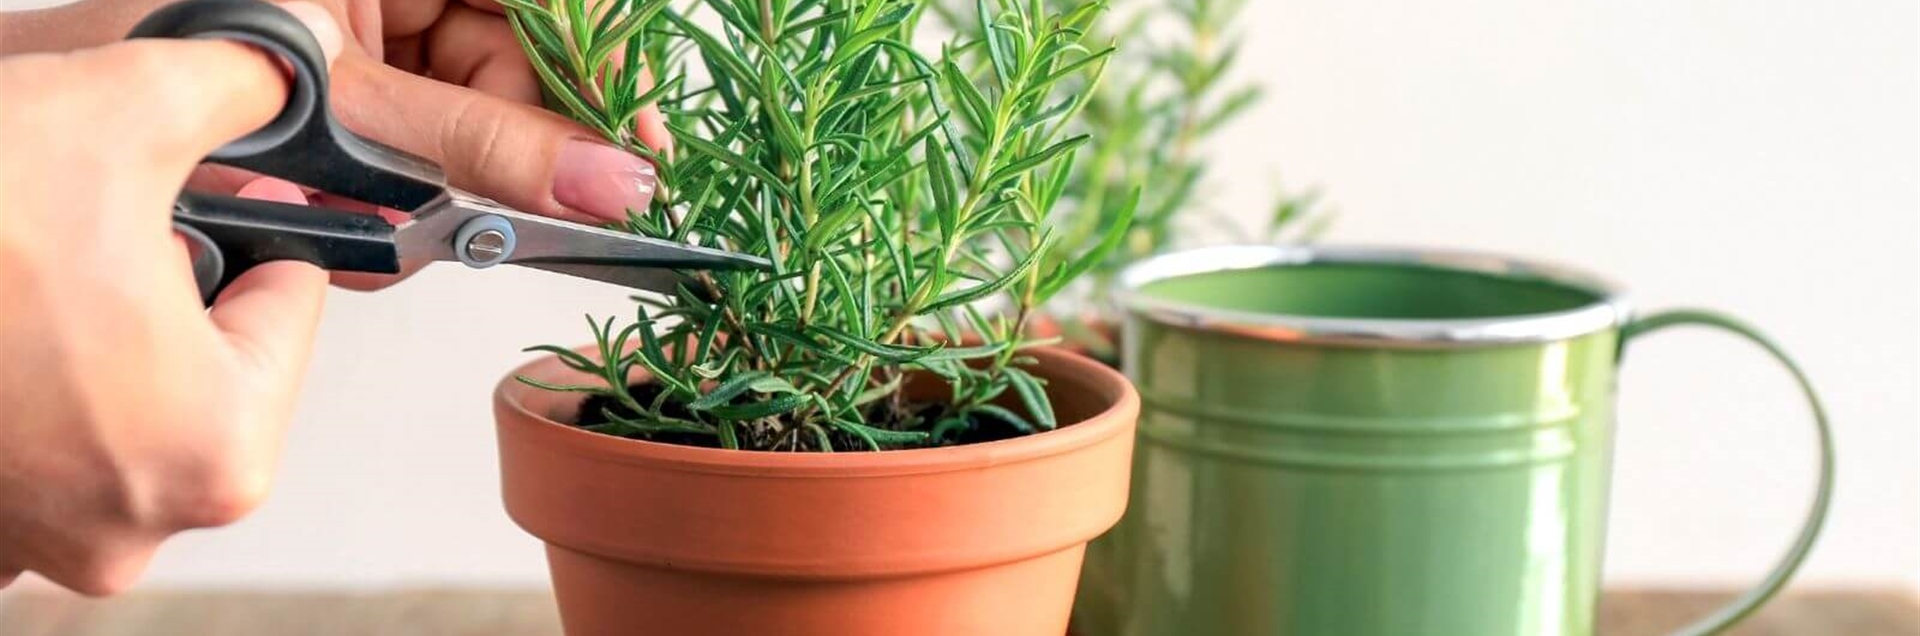 How to make a rosemary cutting